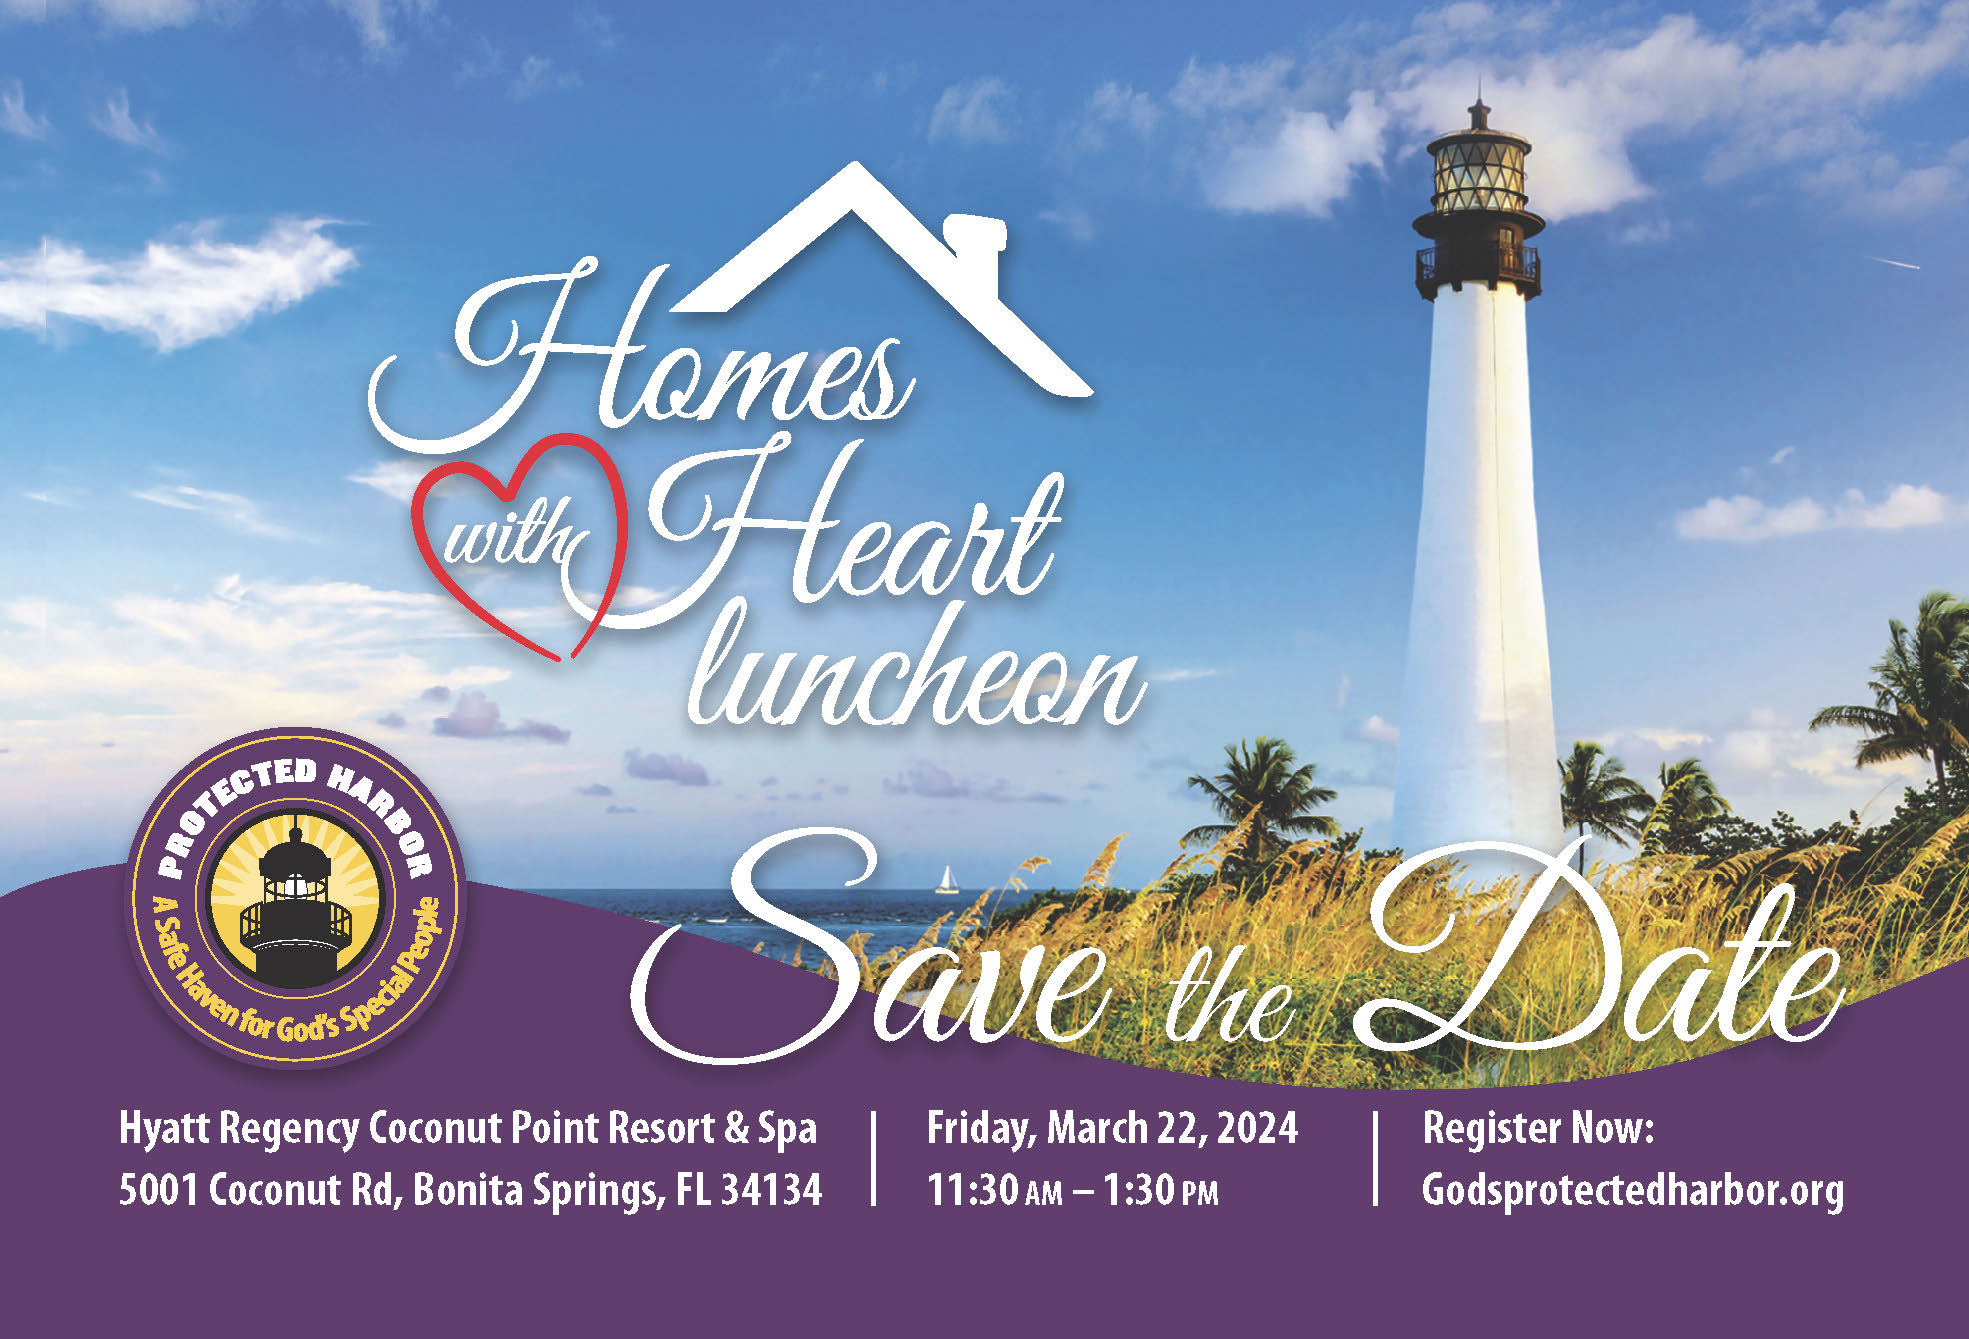 Our Annual Homes with Heart Luncheon